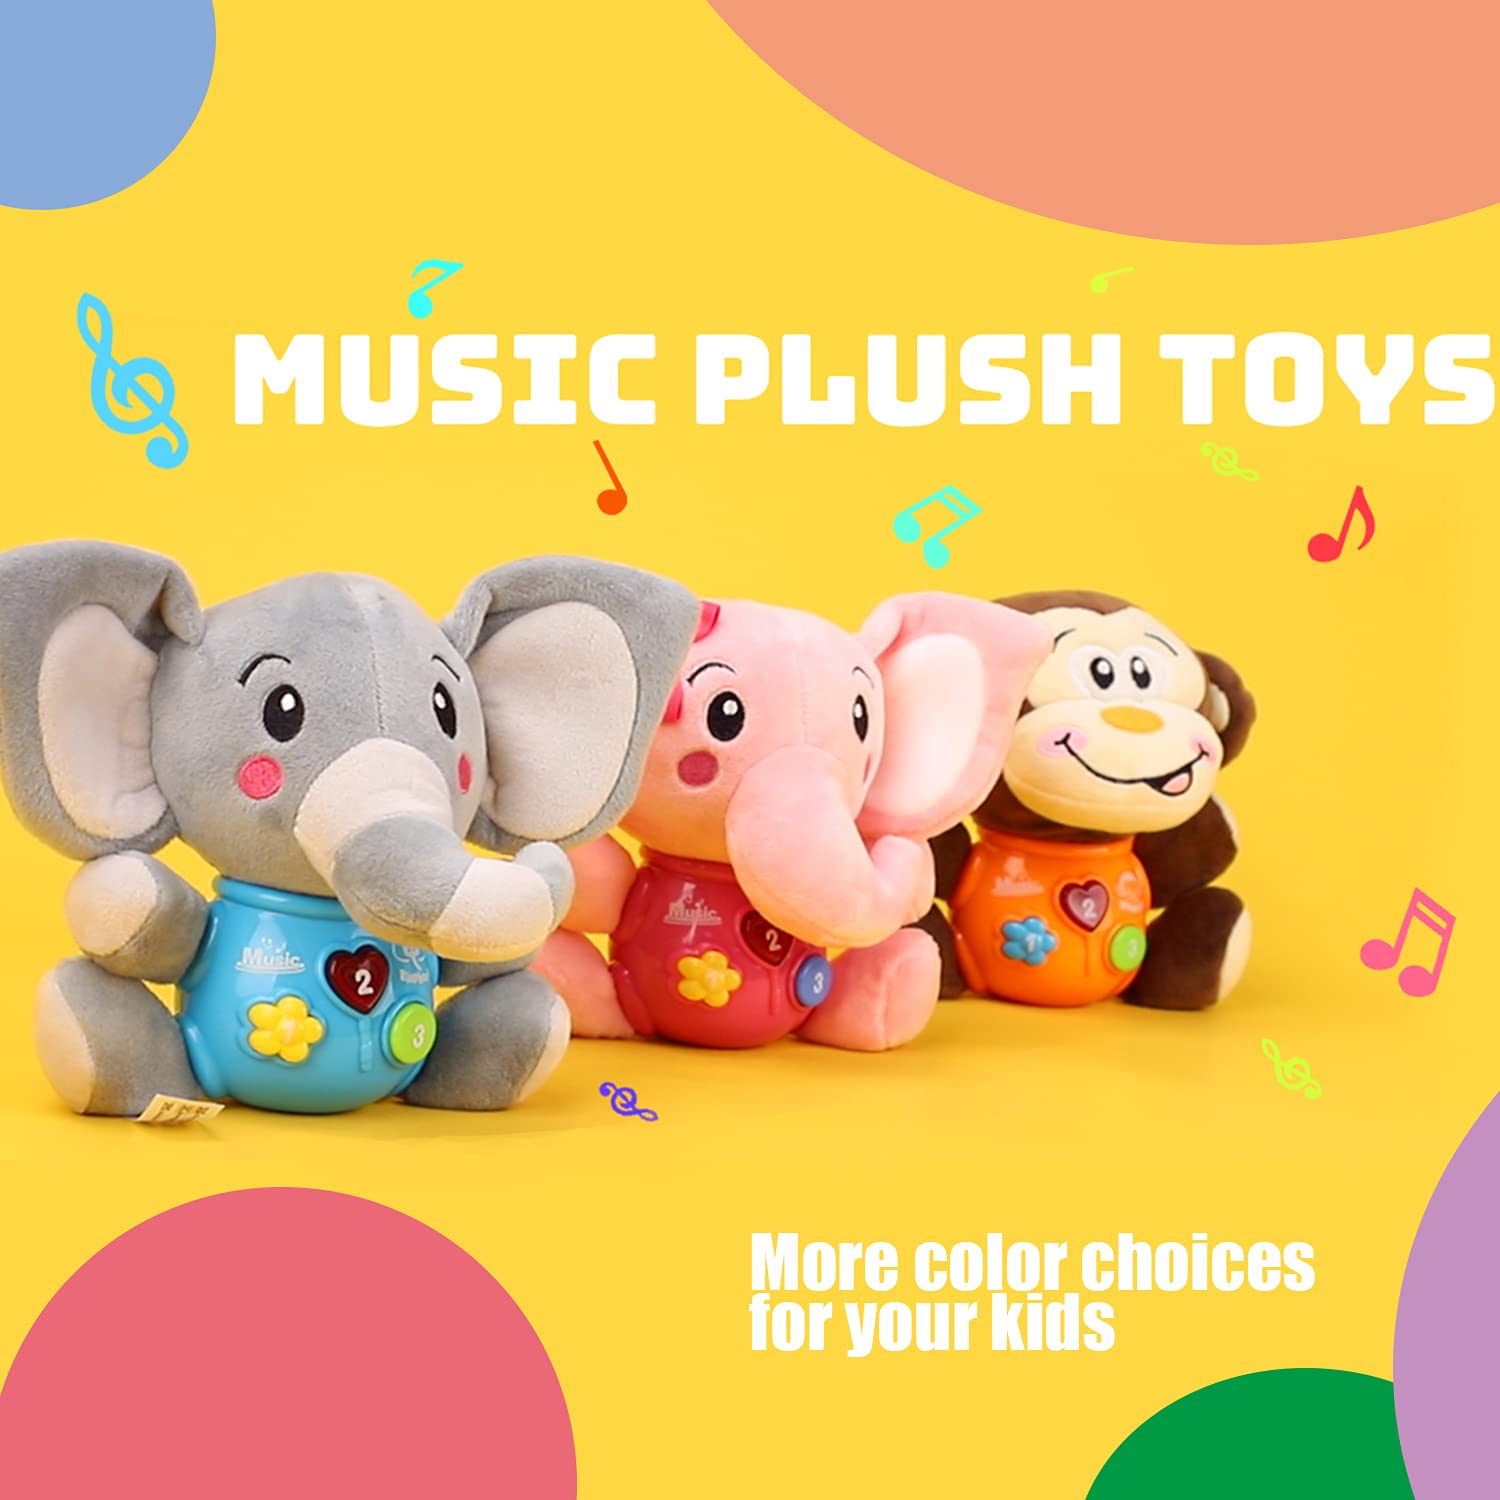 STEAM Life Plush Elephant Baby Toys - Newborn Baby Musical Toys for Baby 0 to 36 Months - Light Up Baby Toys for Infants Babies Boys Girls Toddlers Baby Gifts 0 3 6 9 12 Month